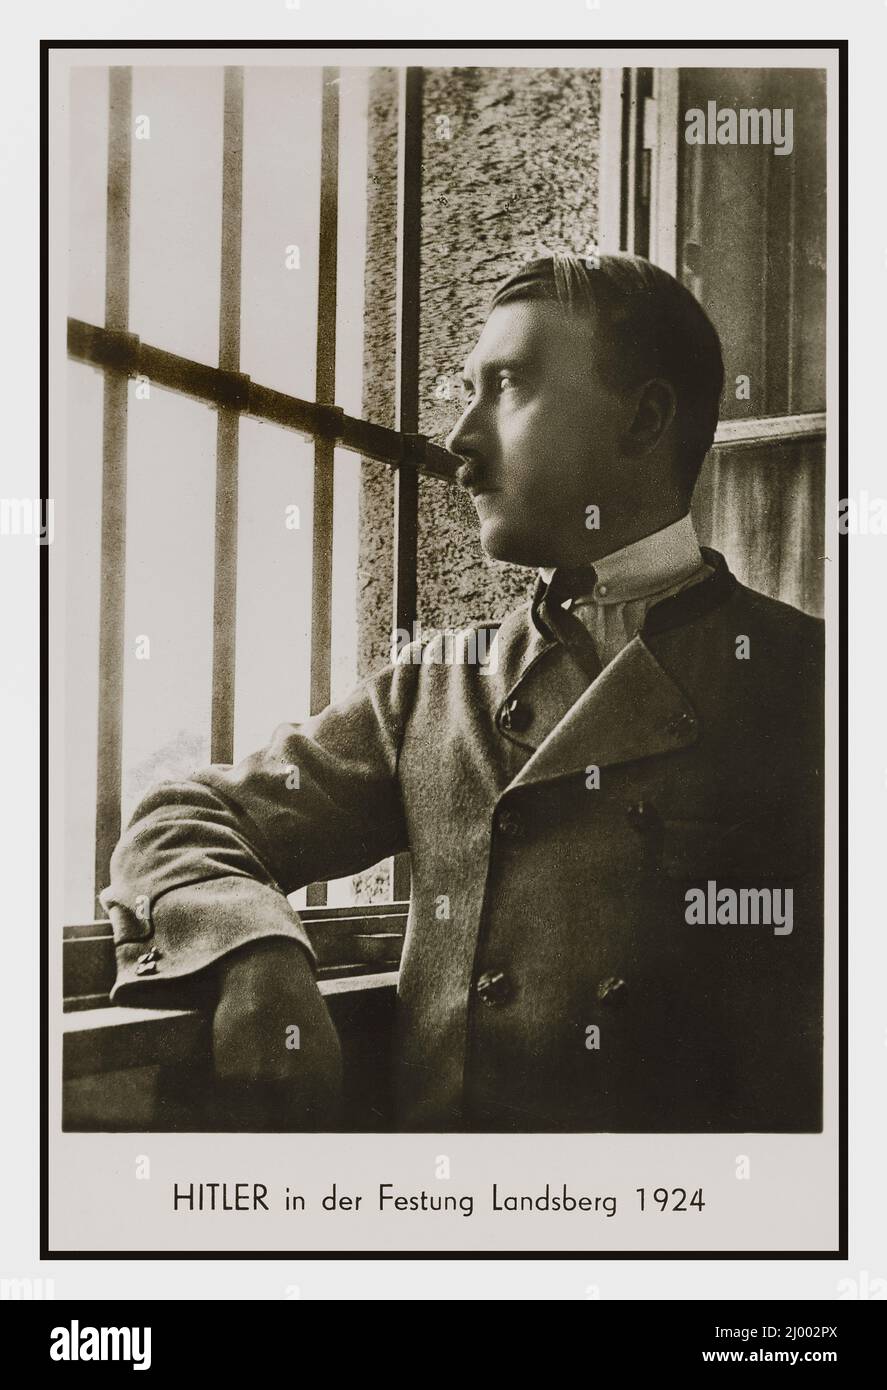 Adolf Hitler in the Landsberg Prison in 1924 It is best known as the prison where Adolf Hitler was held, after the failed Beer Hall Putsch in Munich, and where he dictated his memoirs Mein Kampf  to Rudolf Hess Stock Photo